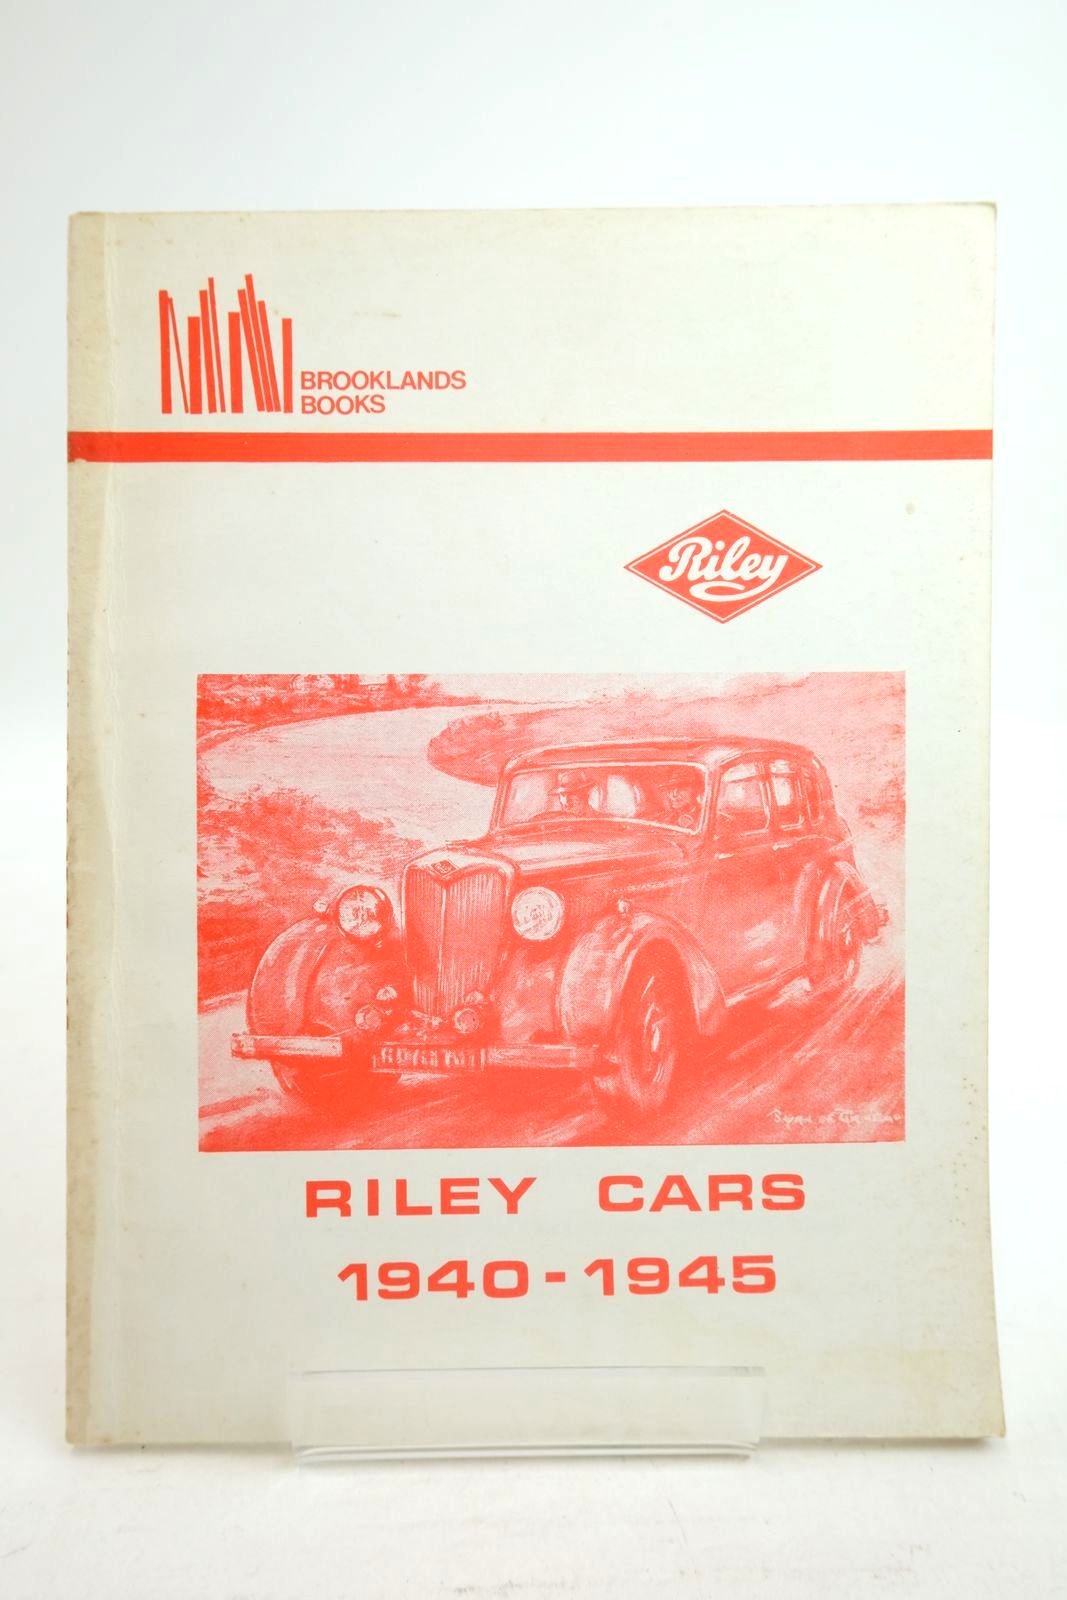 Photo of RILEY CARS 1940 - 1945 published by Brooklands Books (STOCK CODE: 2134599)  for sale by Stella & Rose's Books